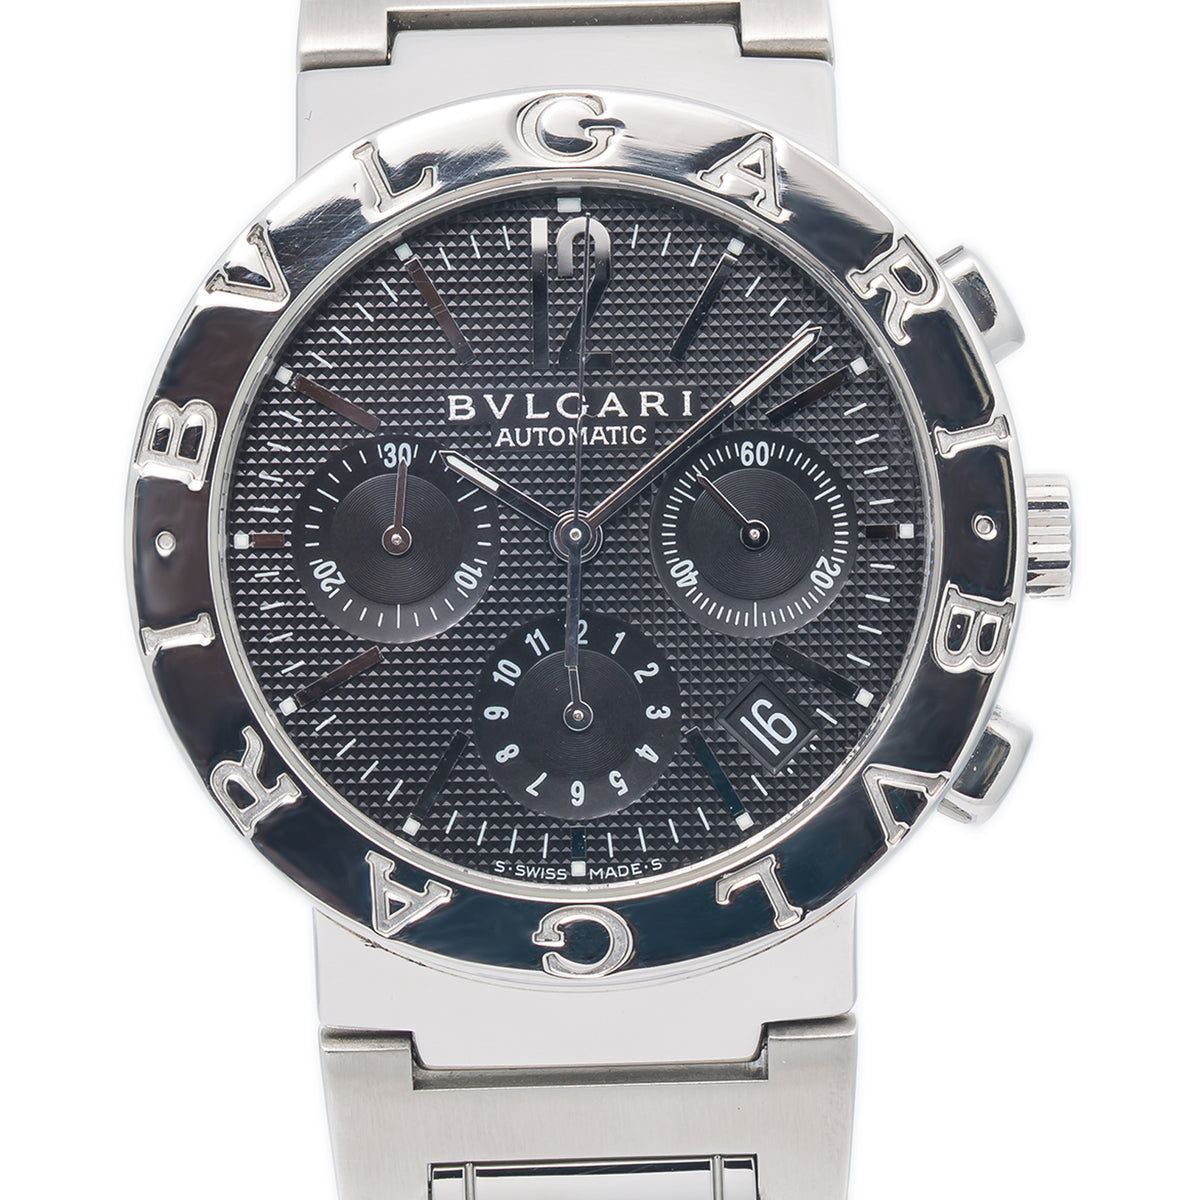 Bvlgari BB38SSCH Chronograph Stainless Steel Black Dial Automatic Watch 38mm